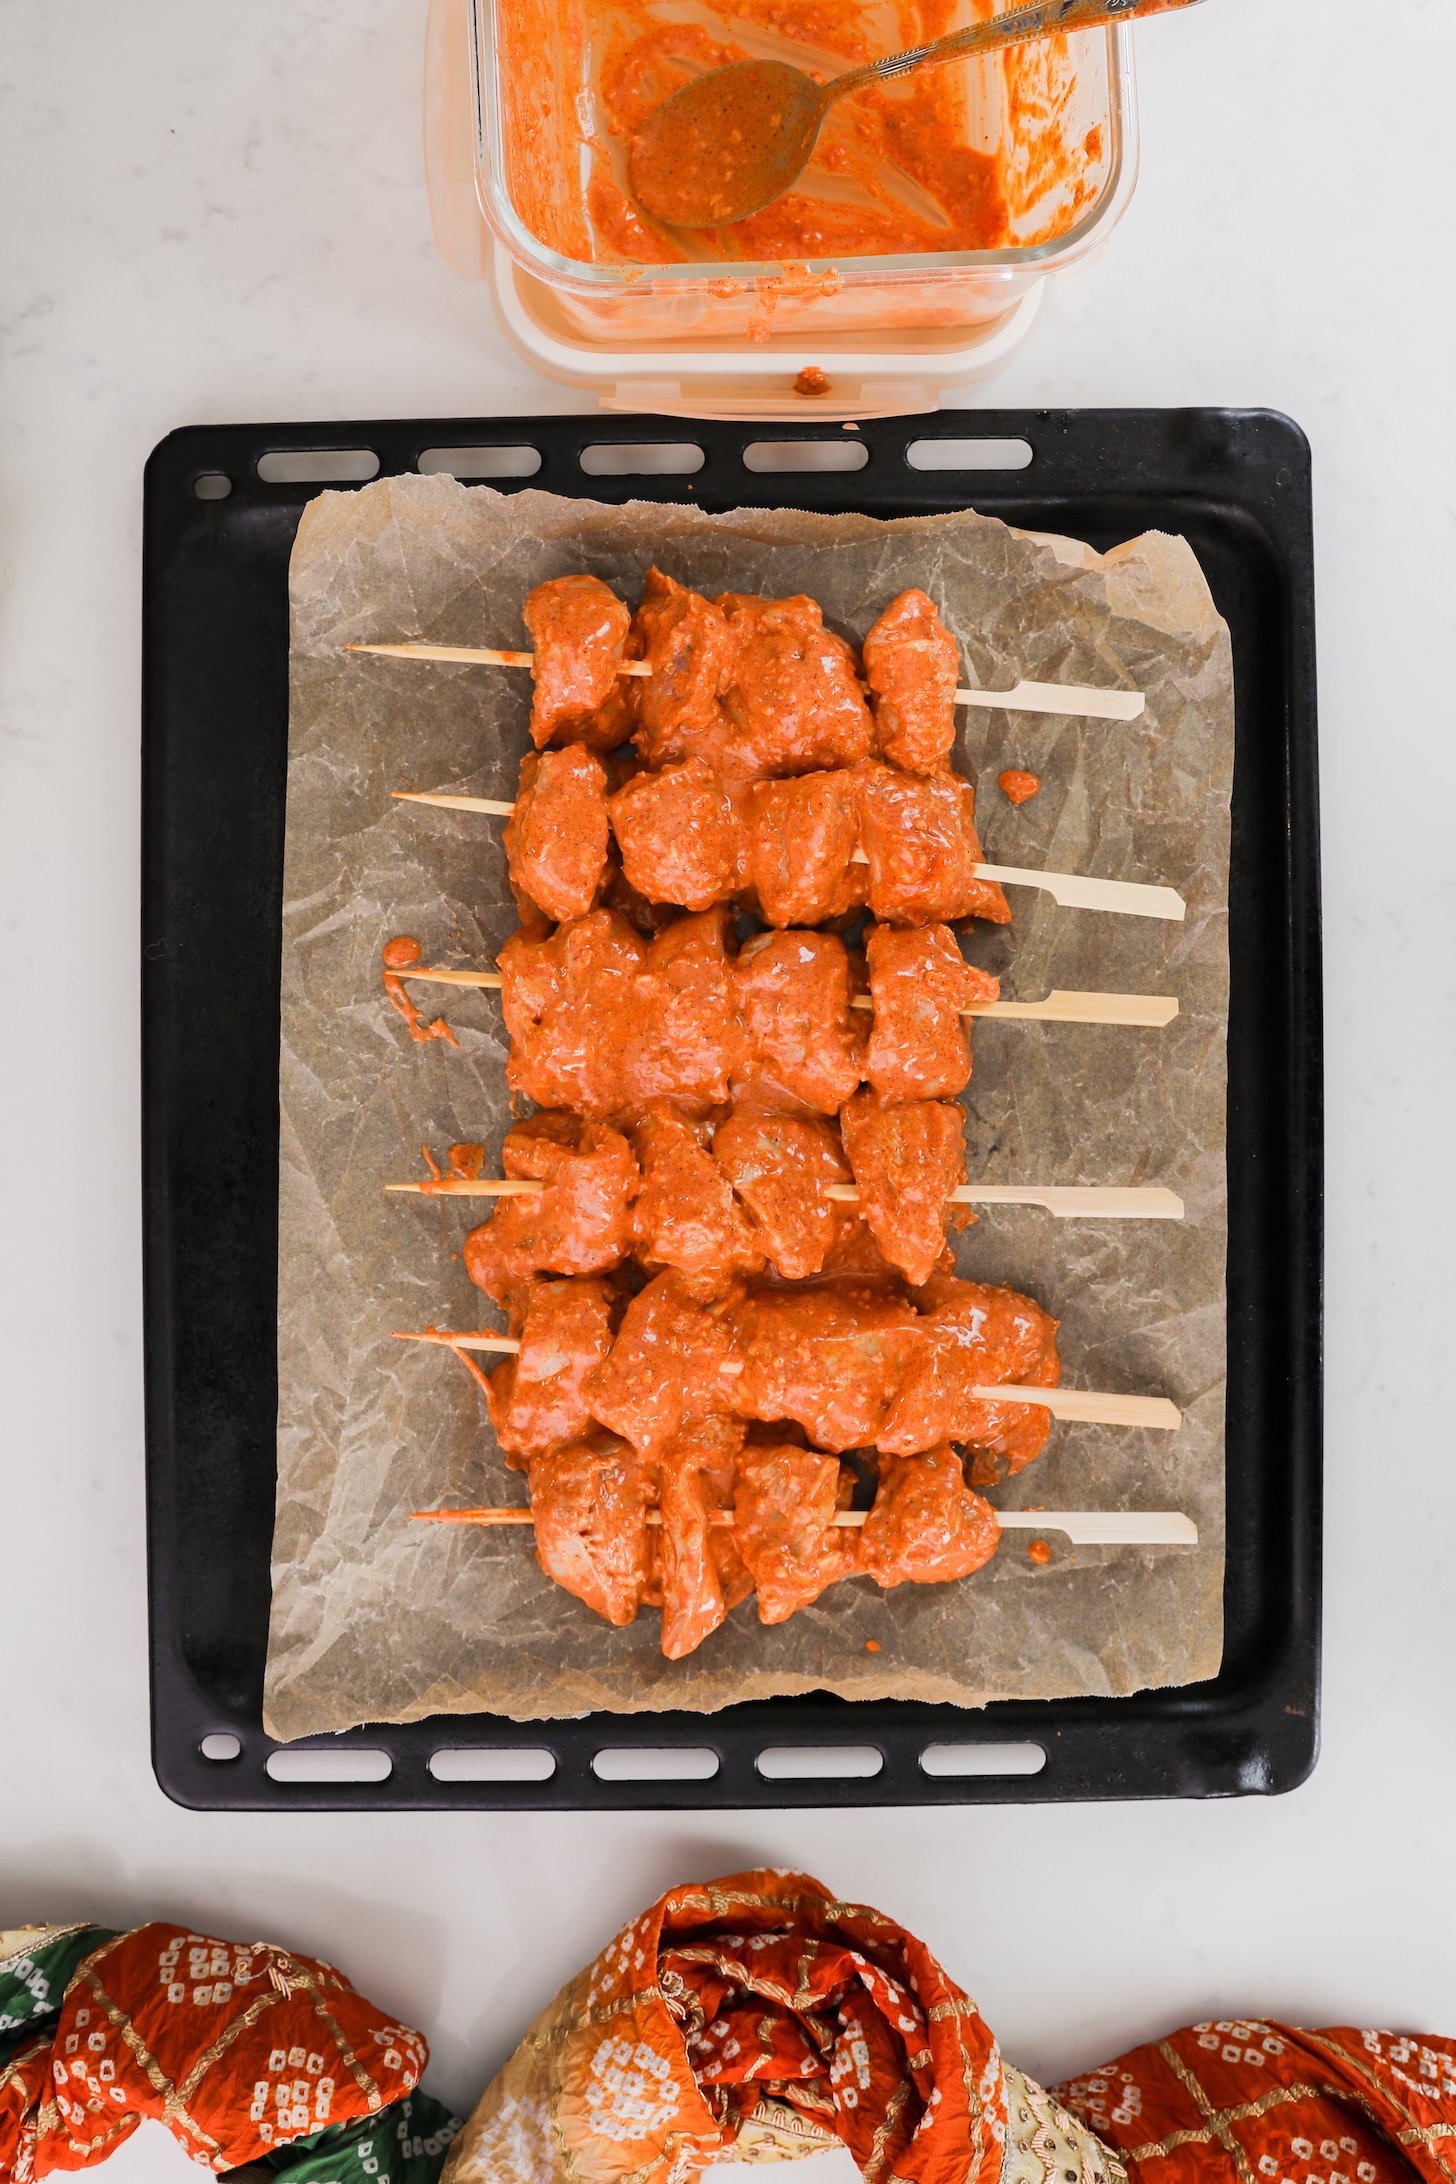 Six skewers of marinated chicken on an oven tray.